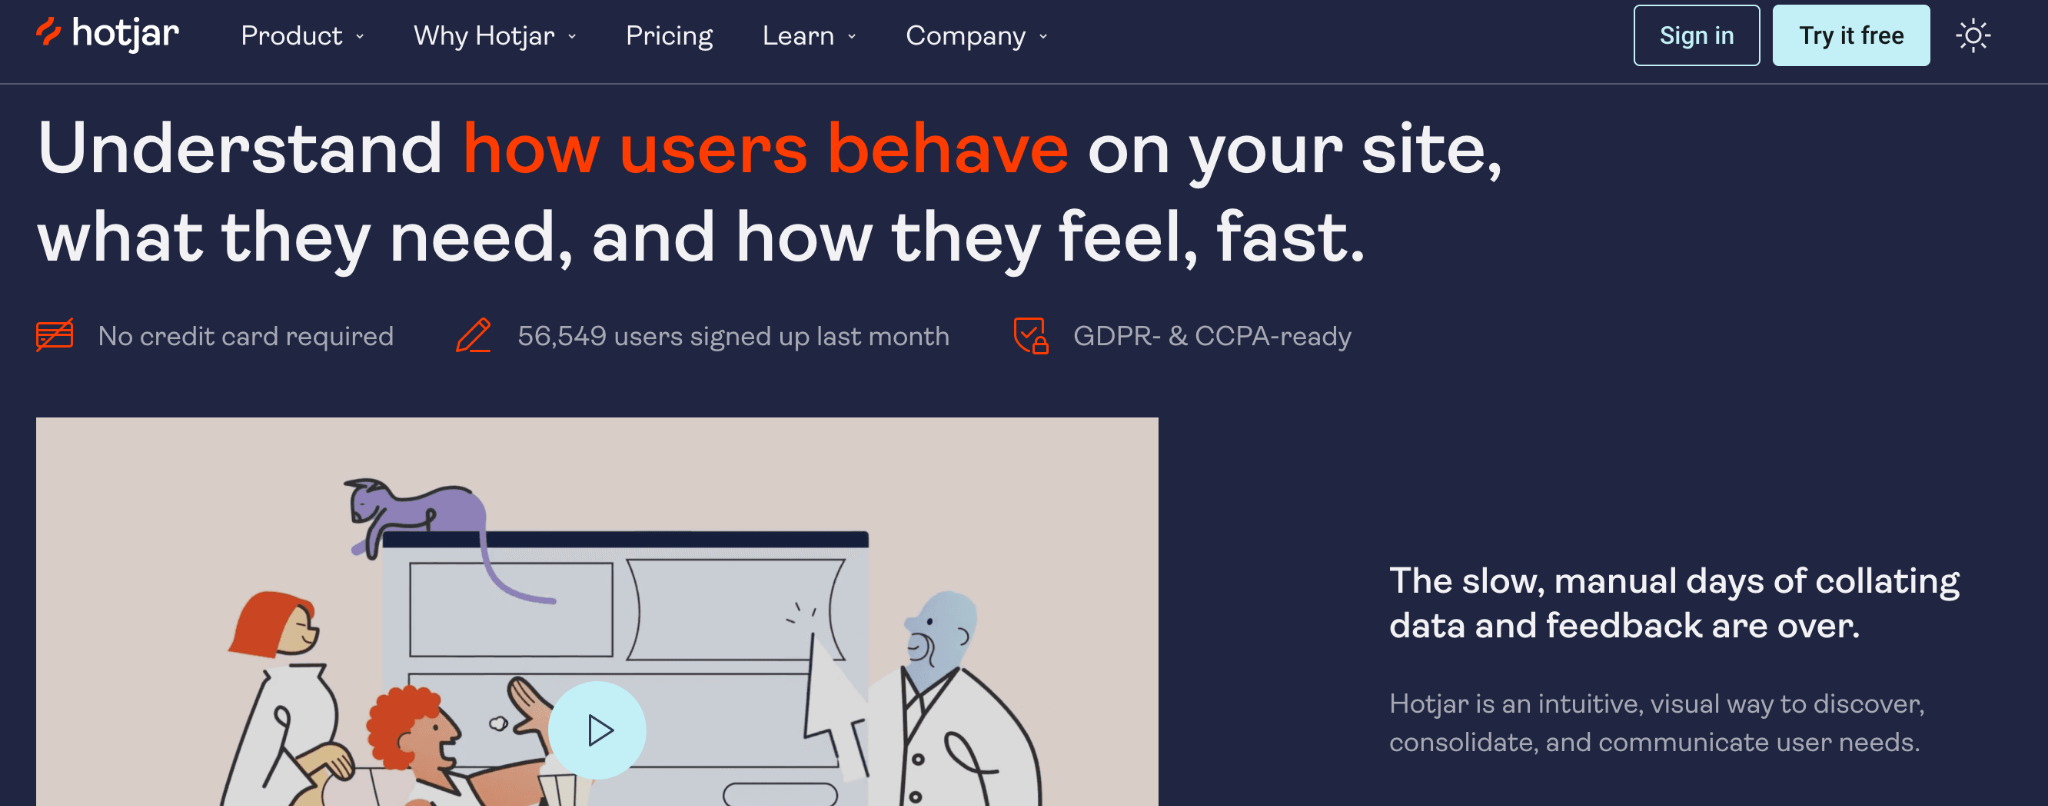 Hotjar homepage: Understand how users behave on your site, what they need, and how they feel, fast.